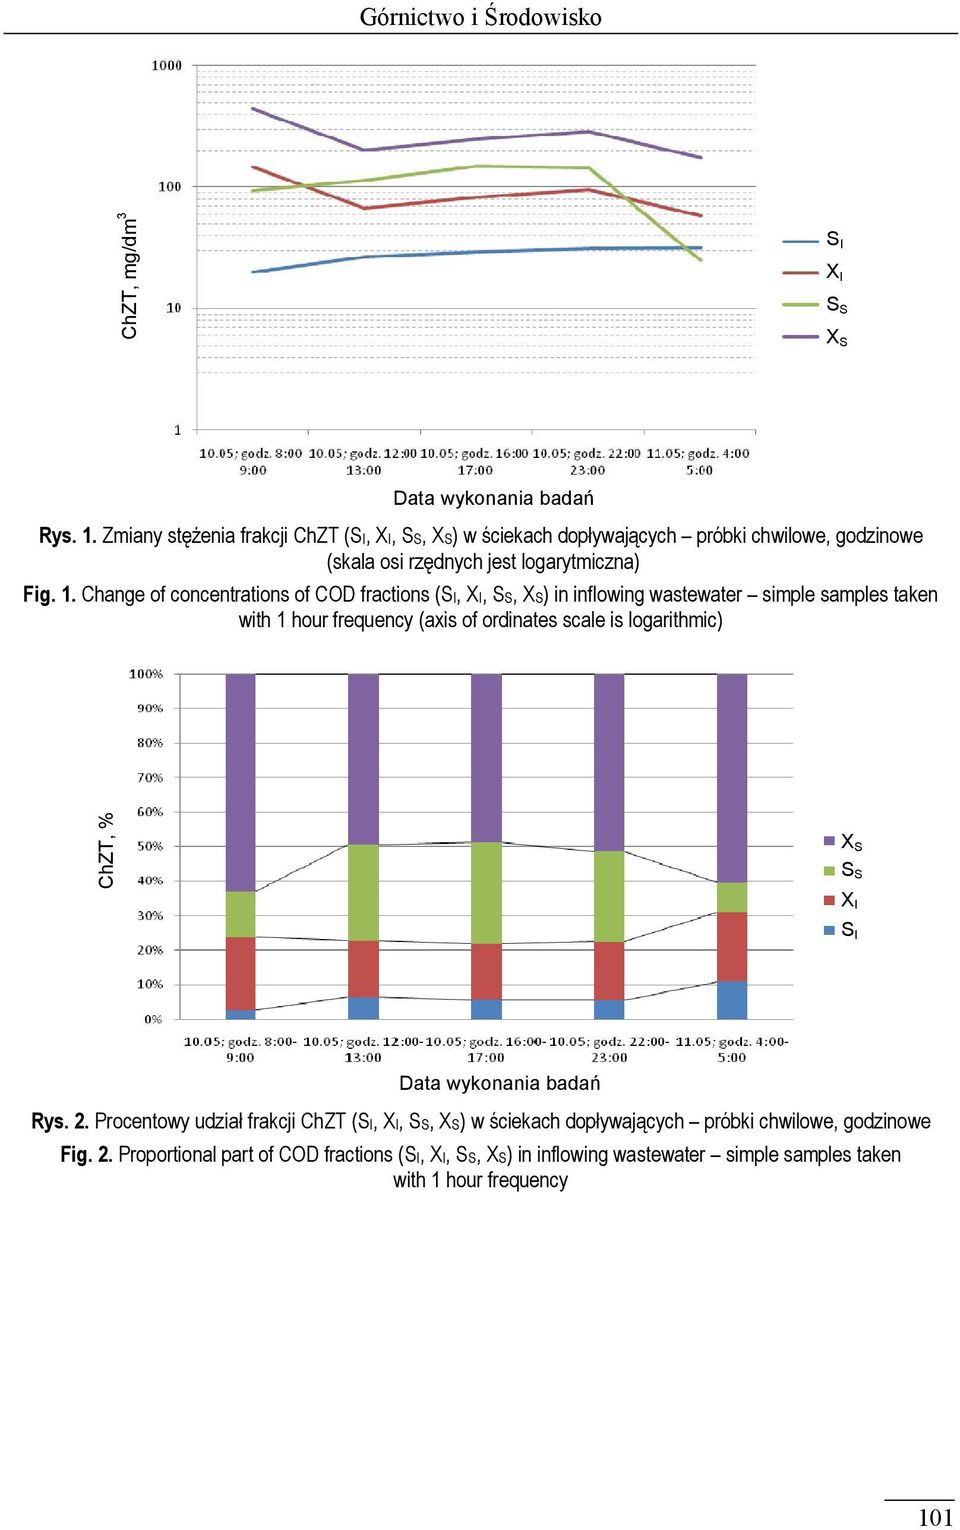 Change of concentrations of COD fractions (SI, XI, SS, XS) in inflowing wastewater simple samples taken with 1 hour frequency (axis of ordinates scale